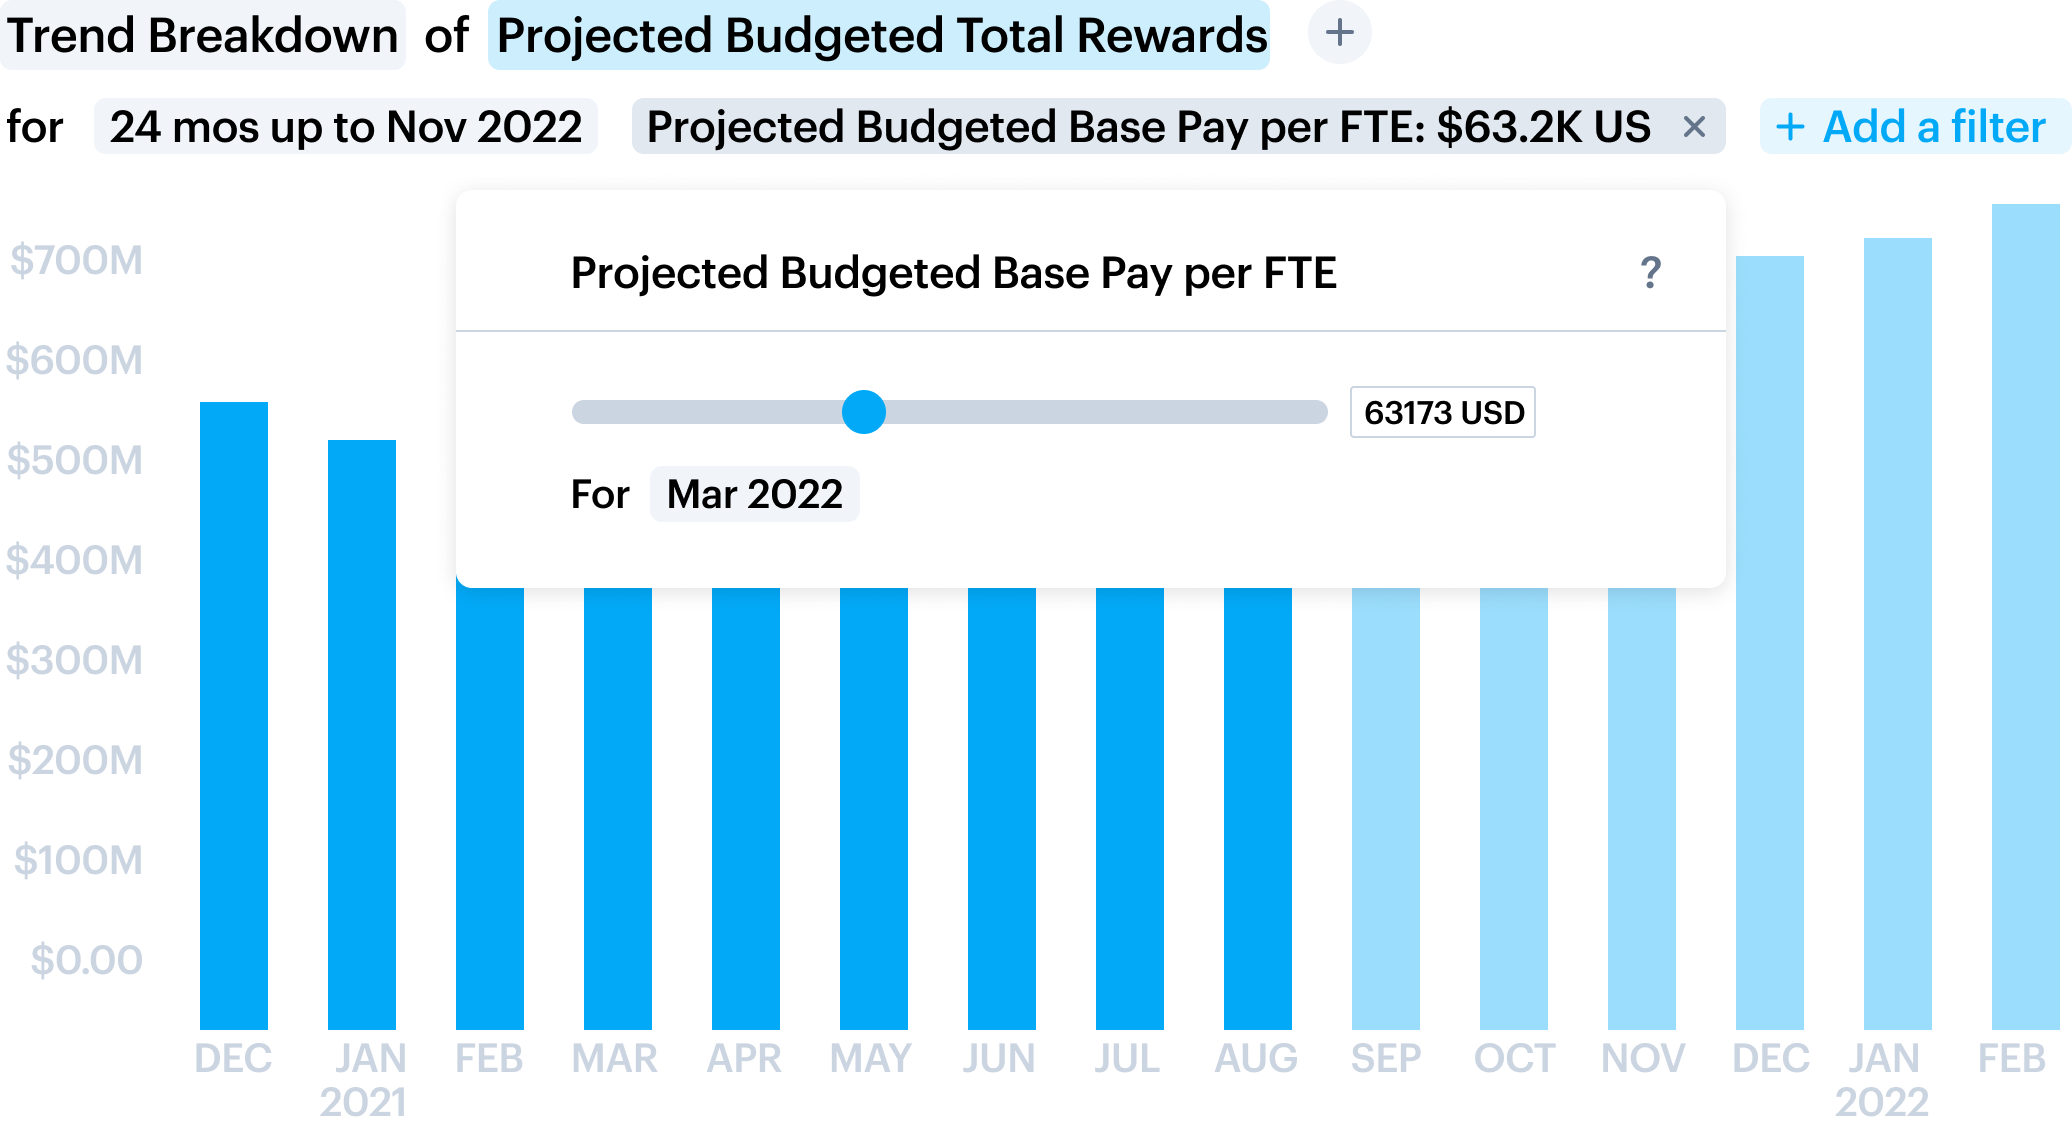 Data visualization showing projected budgeted base pay per FTE